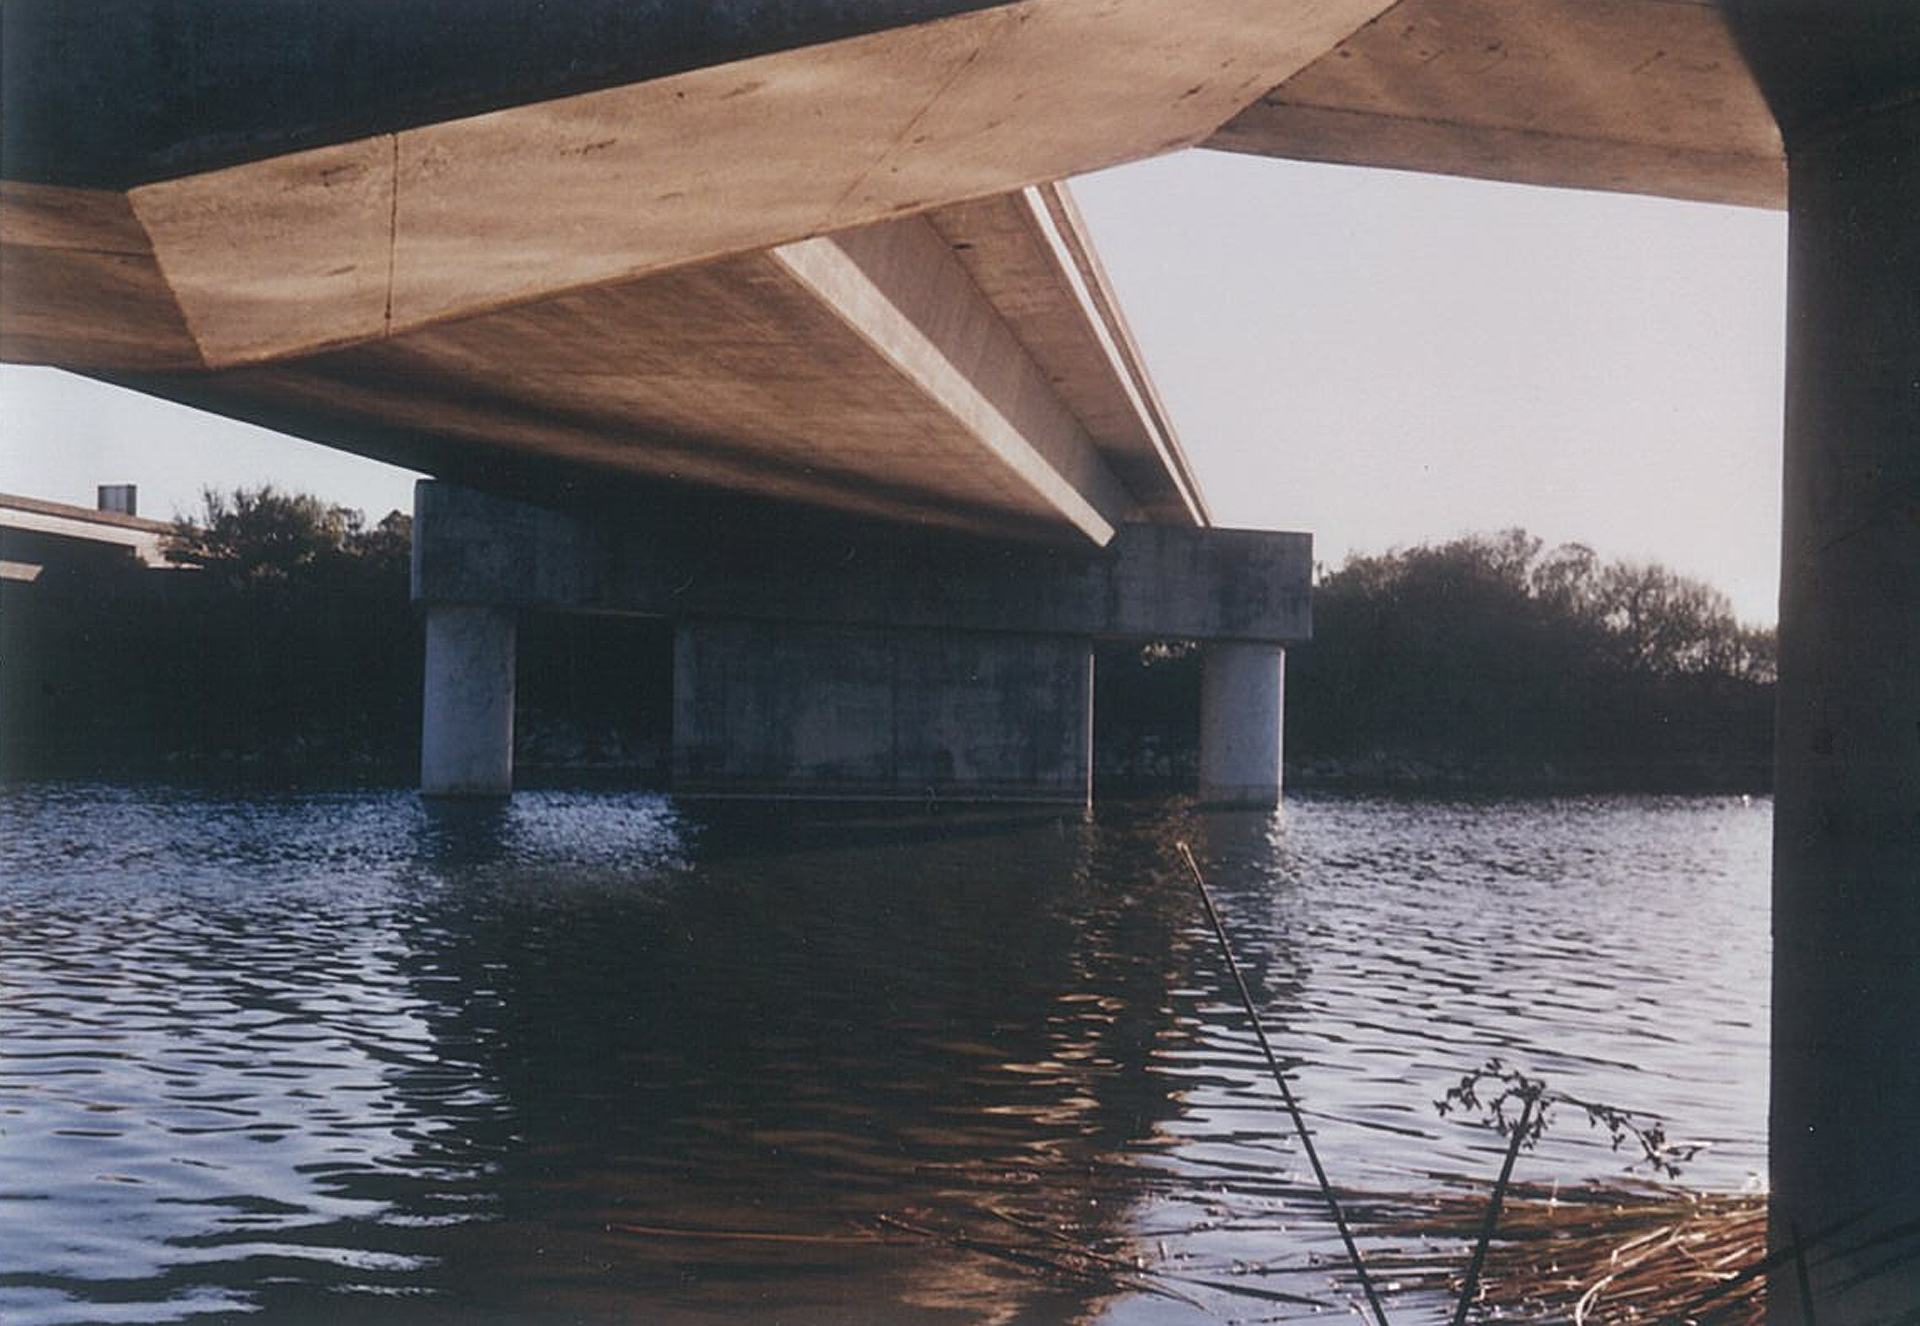 Underneath Hwy. 1 at the Mouth